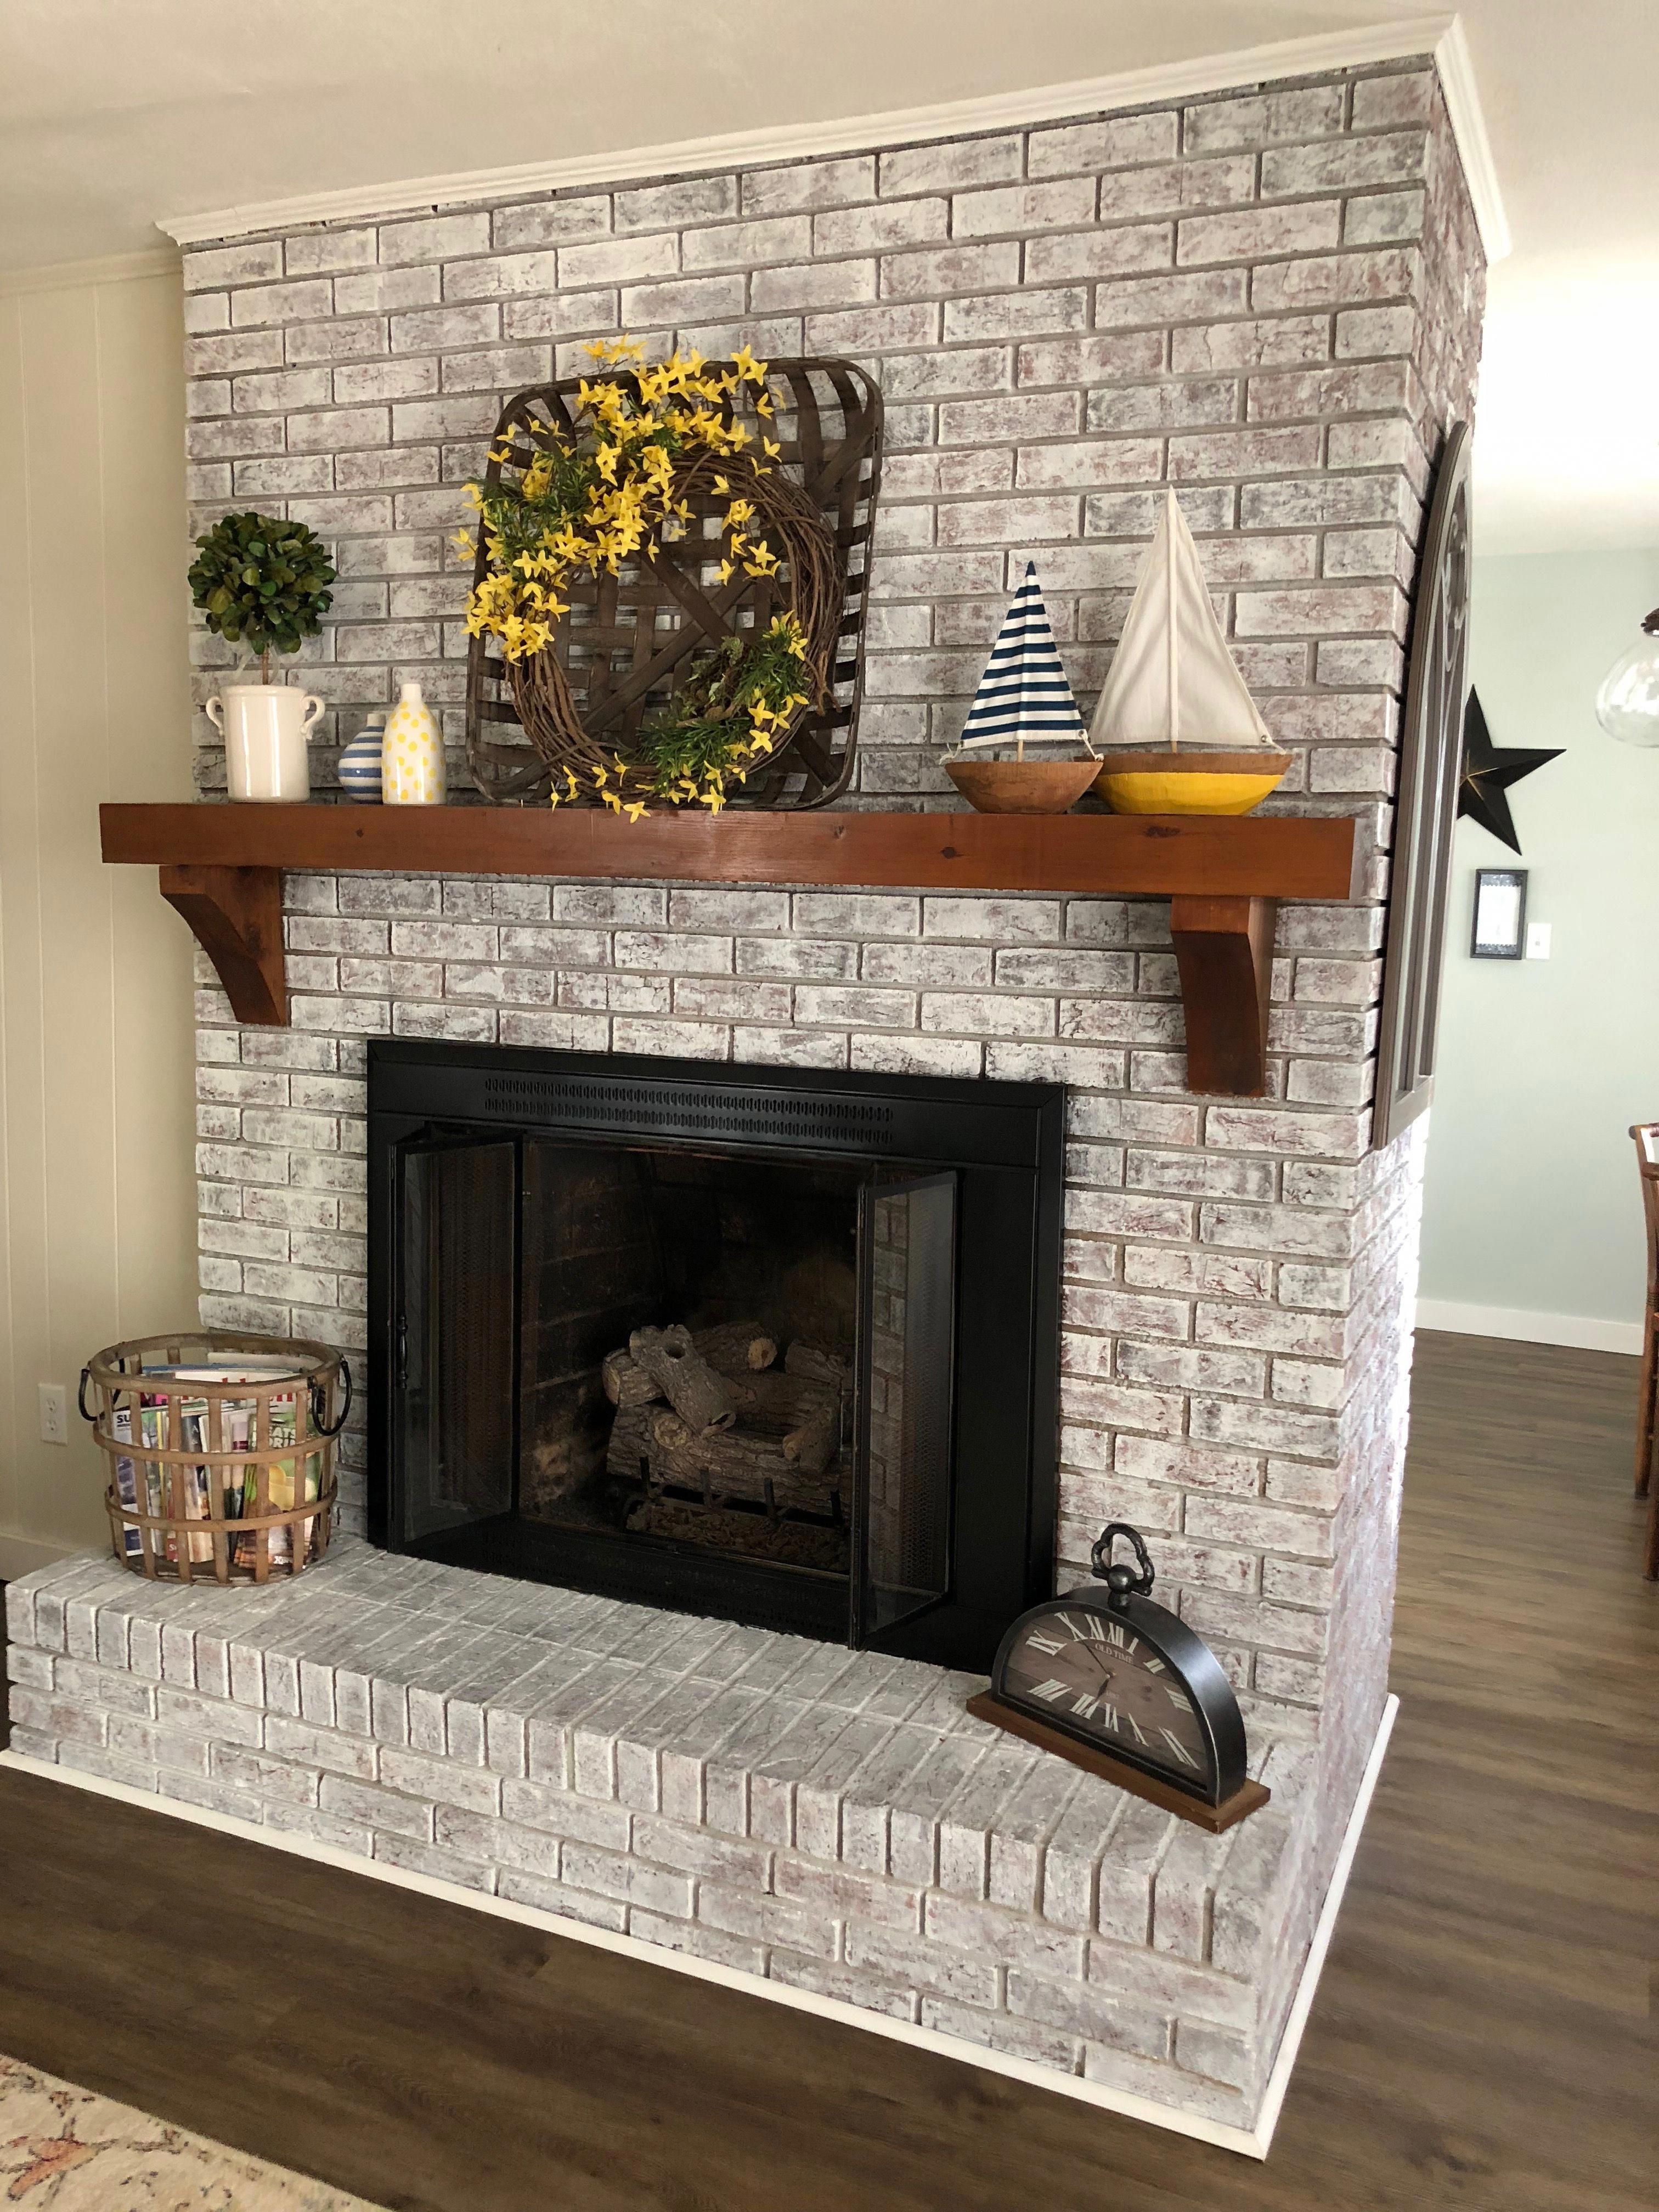 What Paint to Use On Brick Fireplace Luxury Painted Brick Fireplace Sw Pure White Over Dark Red Brick